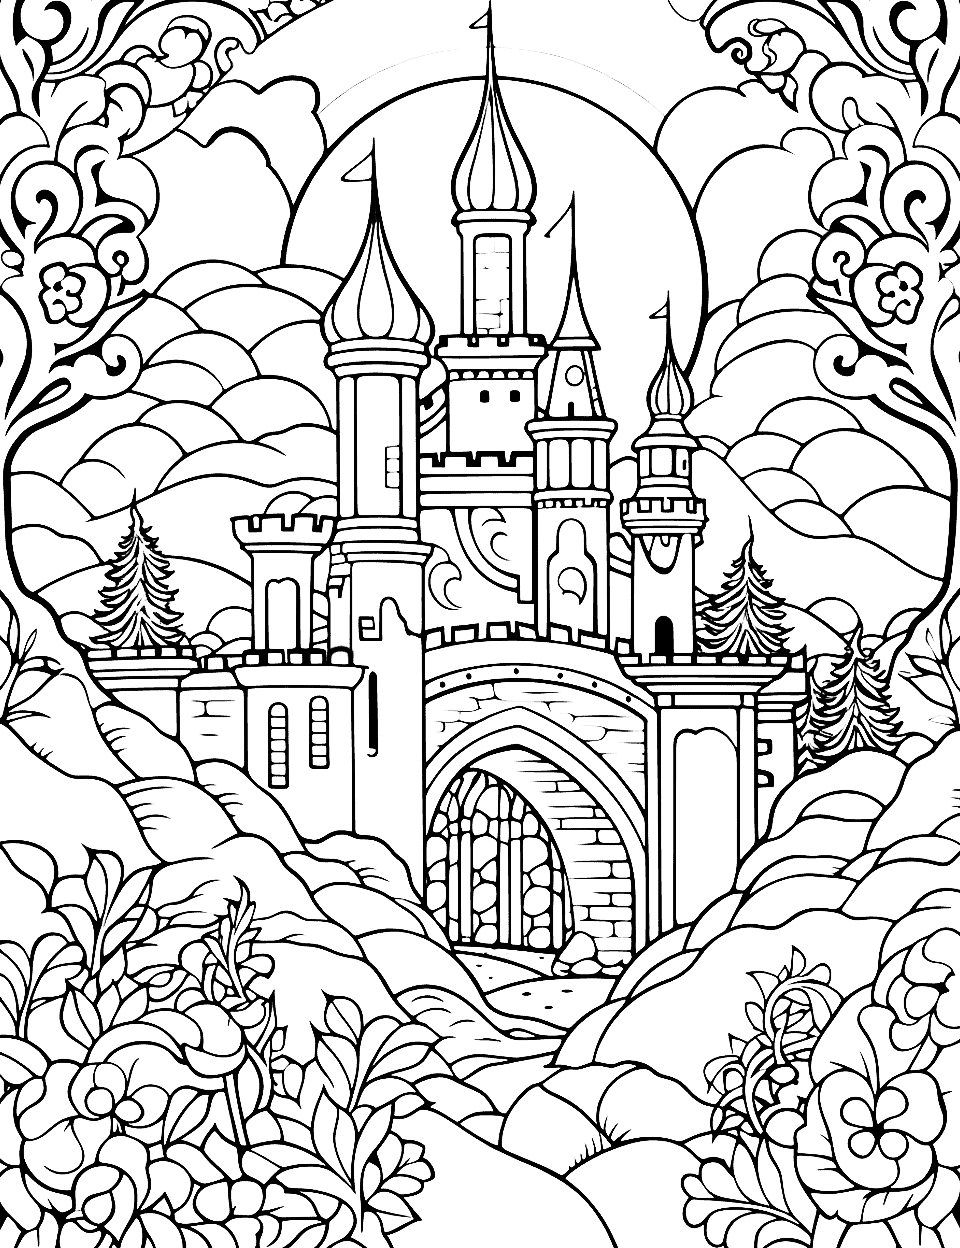 Moonlit Fairy Tale Adult Coloring Page - A detailed fairy tale scene under a moonlit sky featuring a magical castle and lush flora.